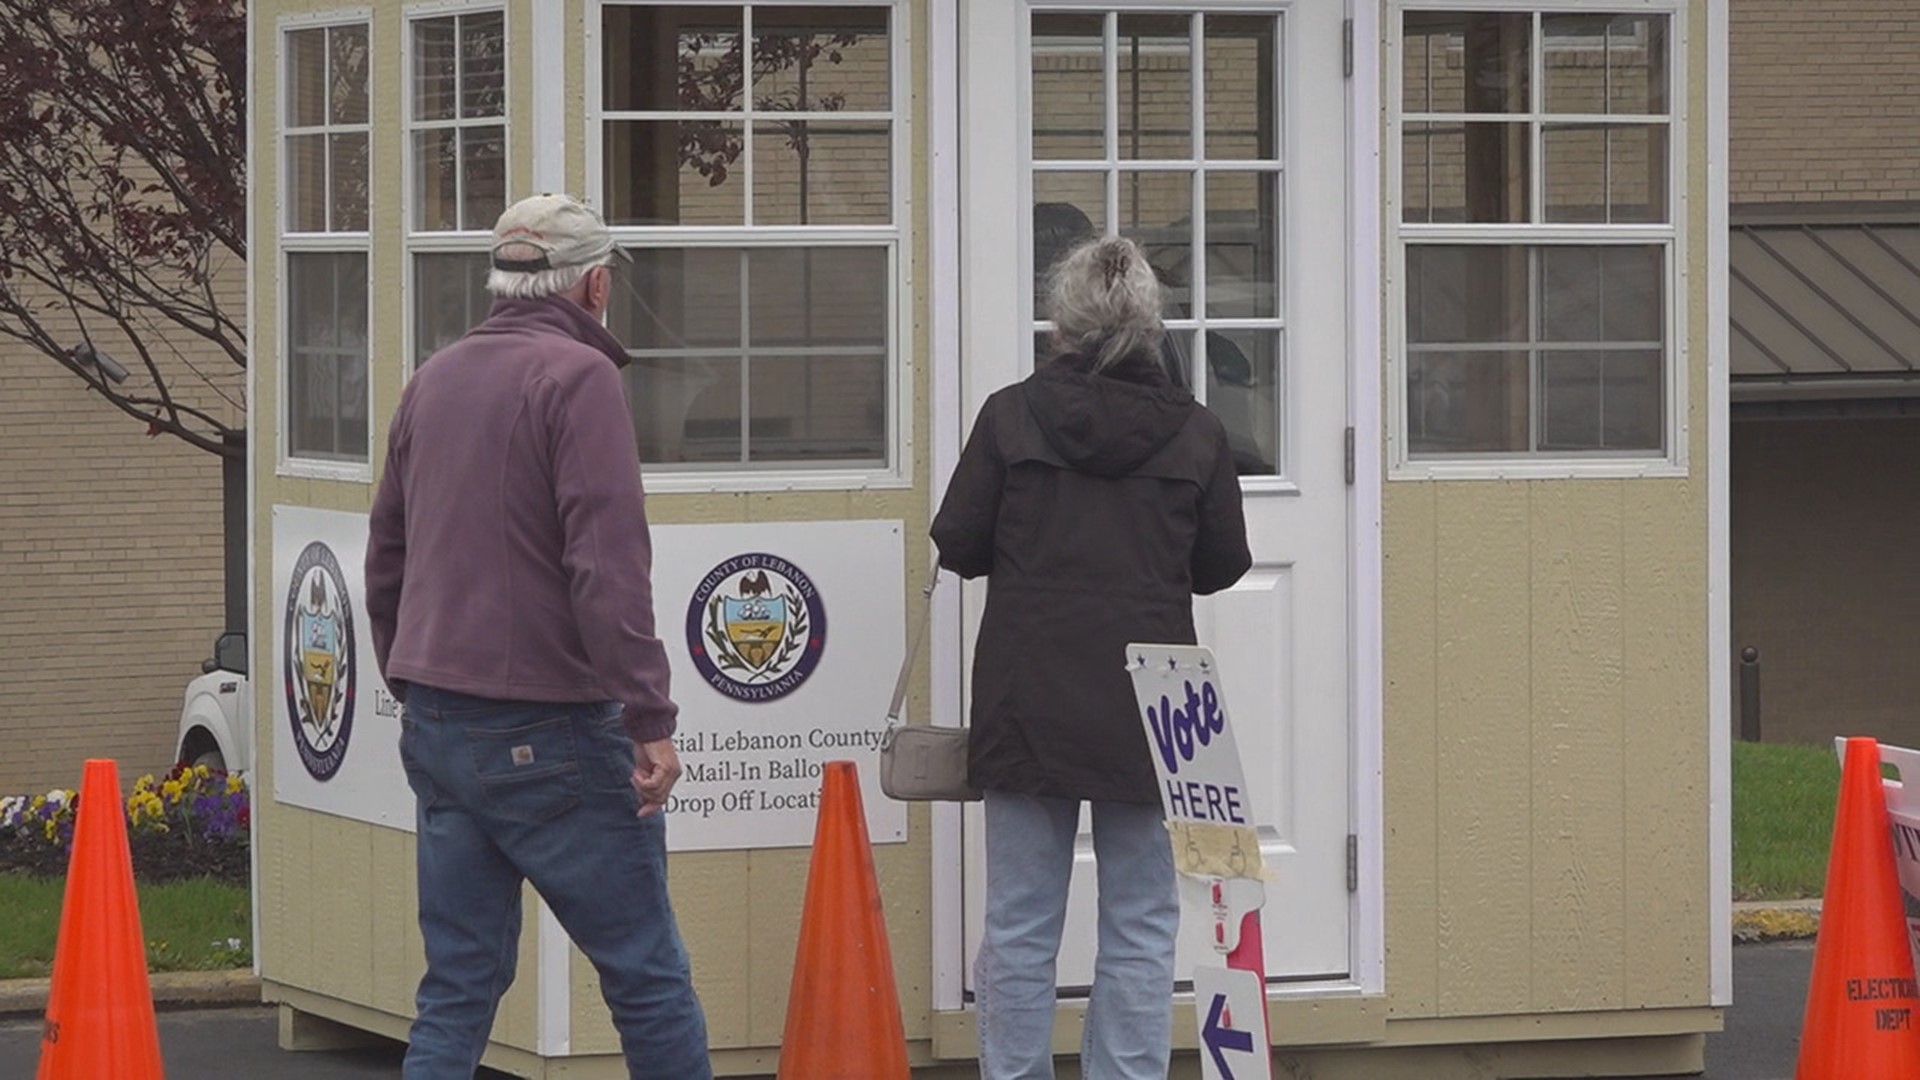 Lebanon County officials are encouraging voters who haven't turned in their ballots to either mail them in or hand deliver them to the county's drop-off zone.